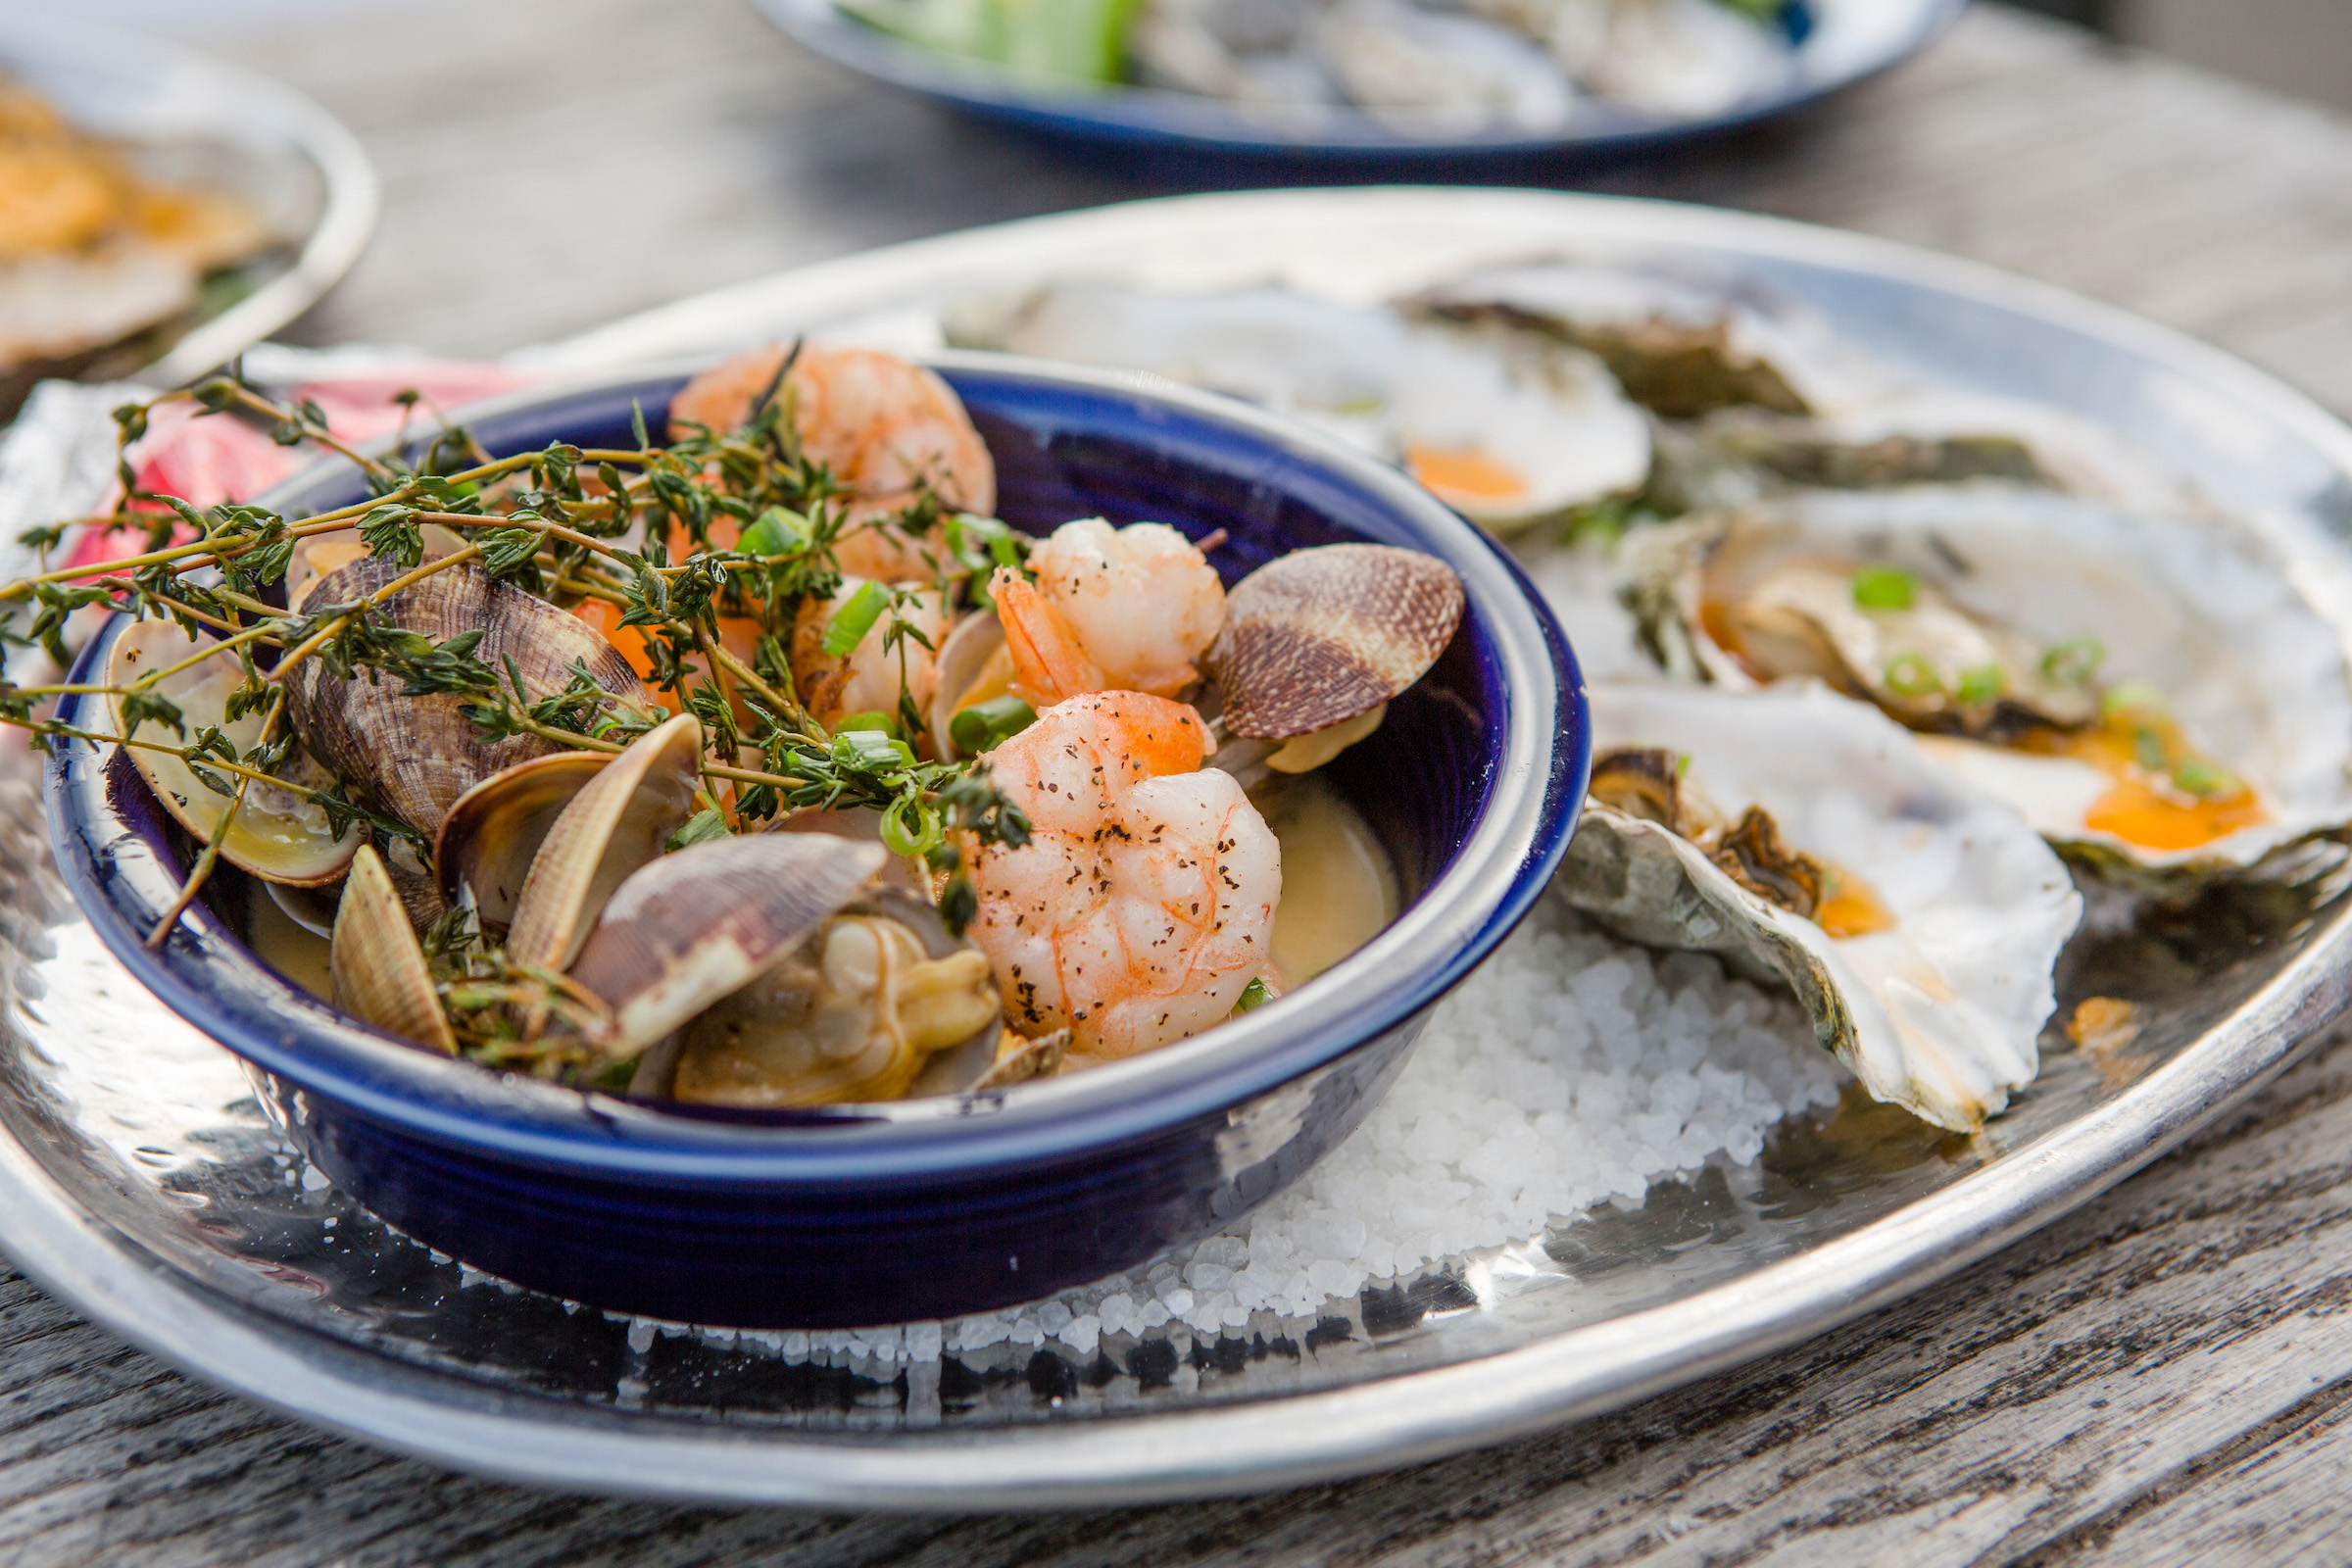 Steamed clams and cooked shrimp in a bowl topped with thyme next to a plate of oysters on a bed of salt